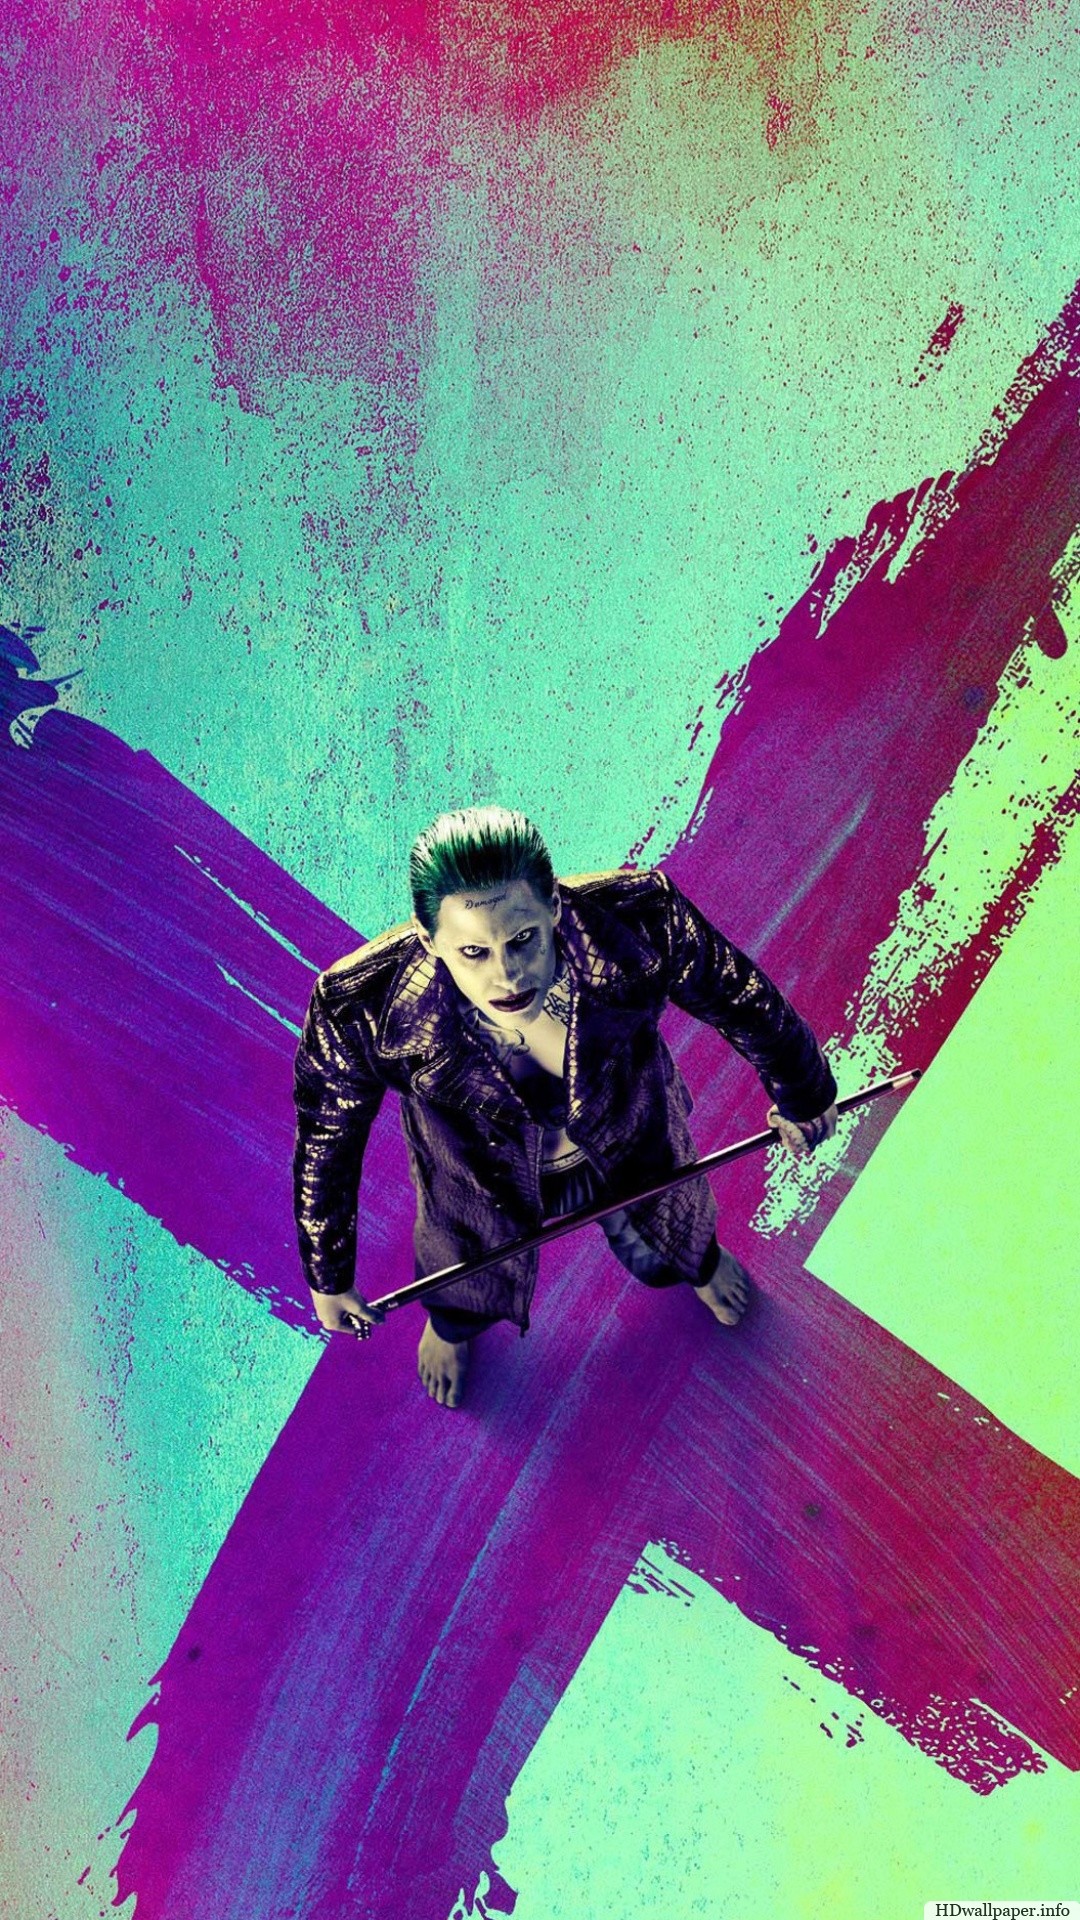 1080x1920 suicide squad wallpaper android - http://hdwallpaper.info/suicide-squad